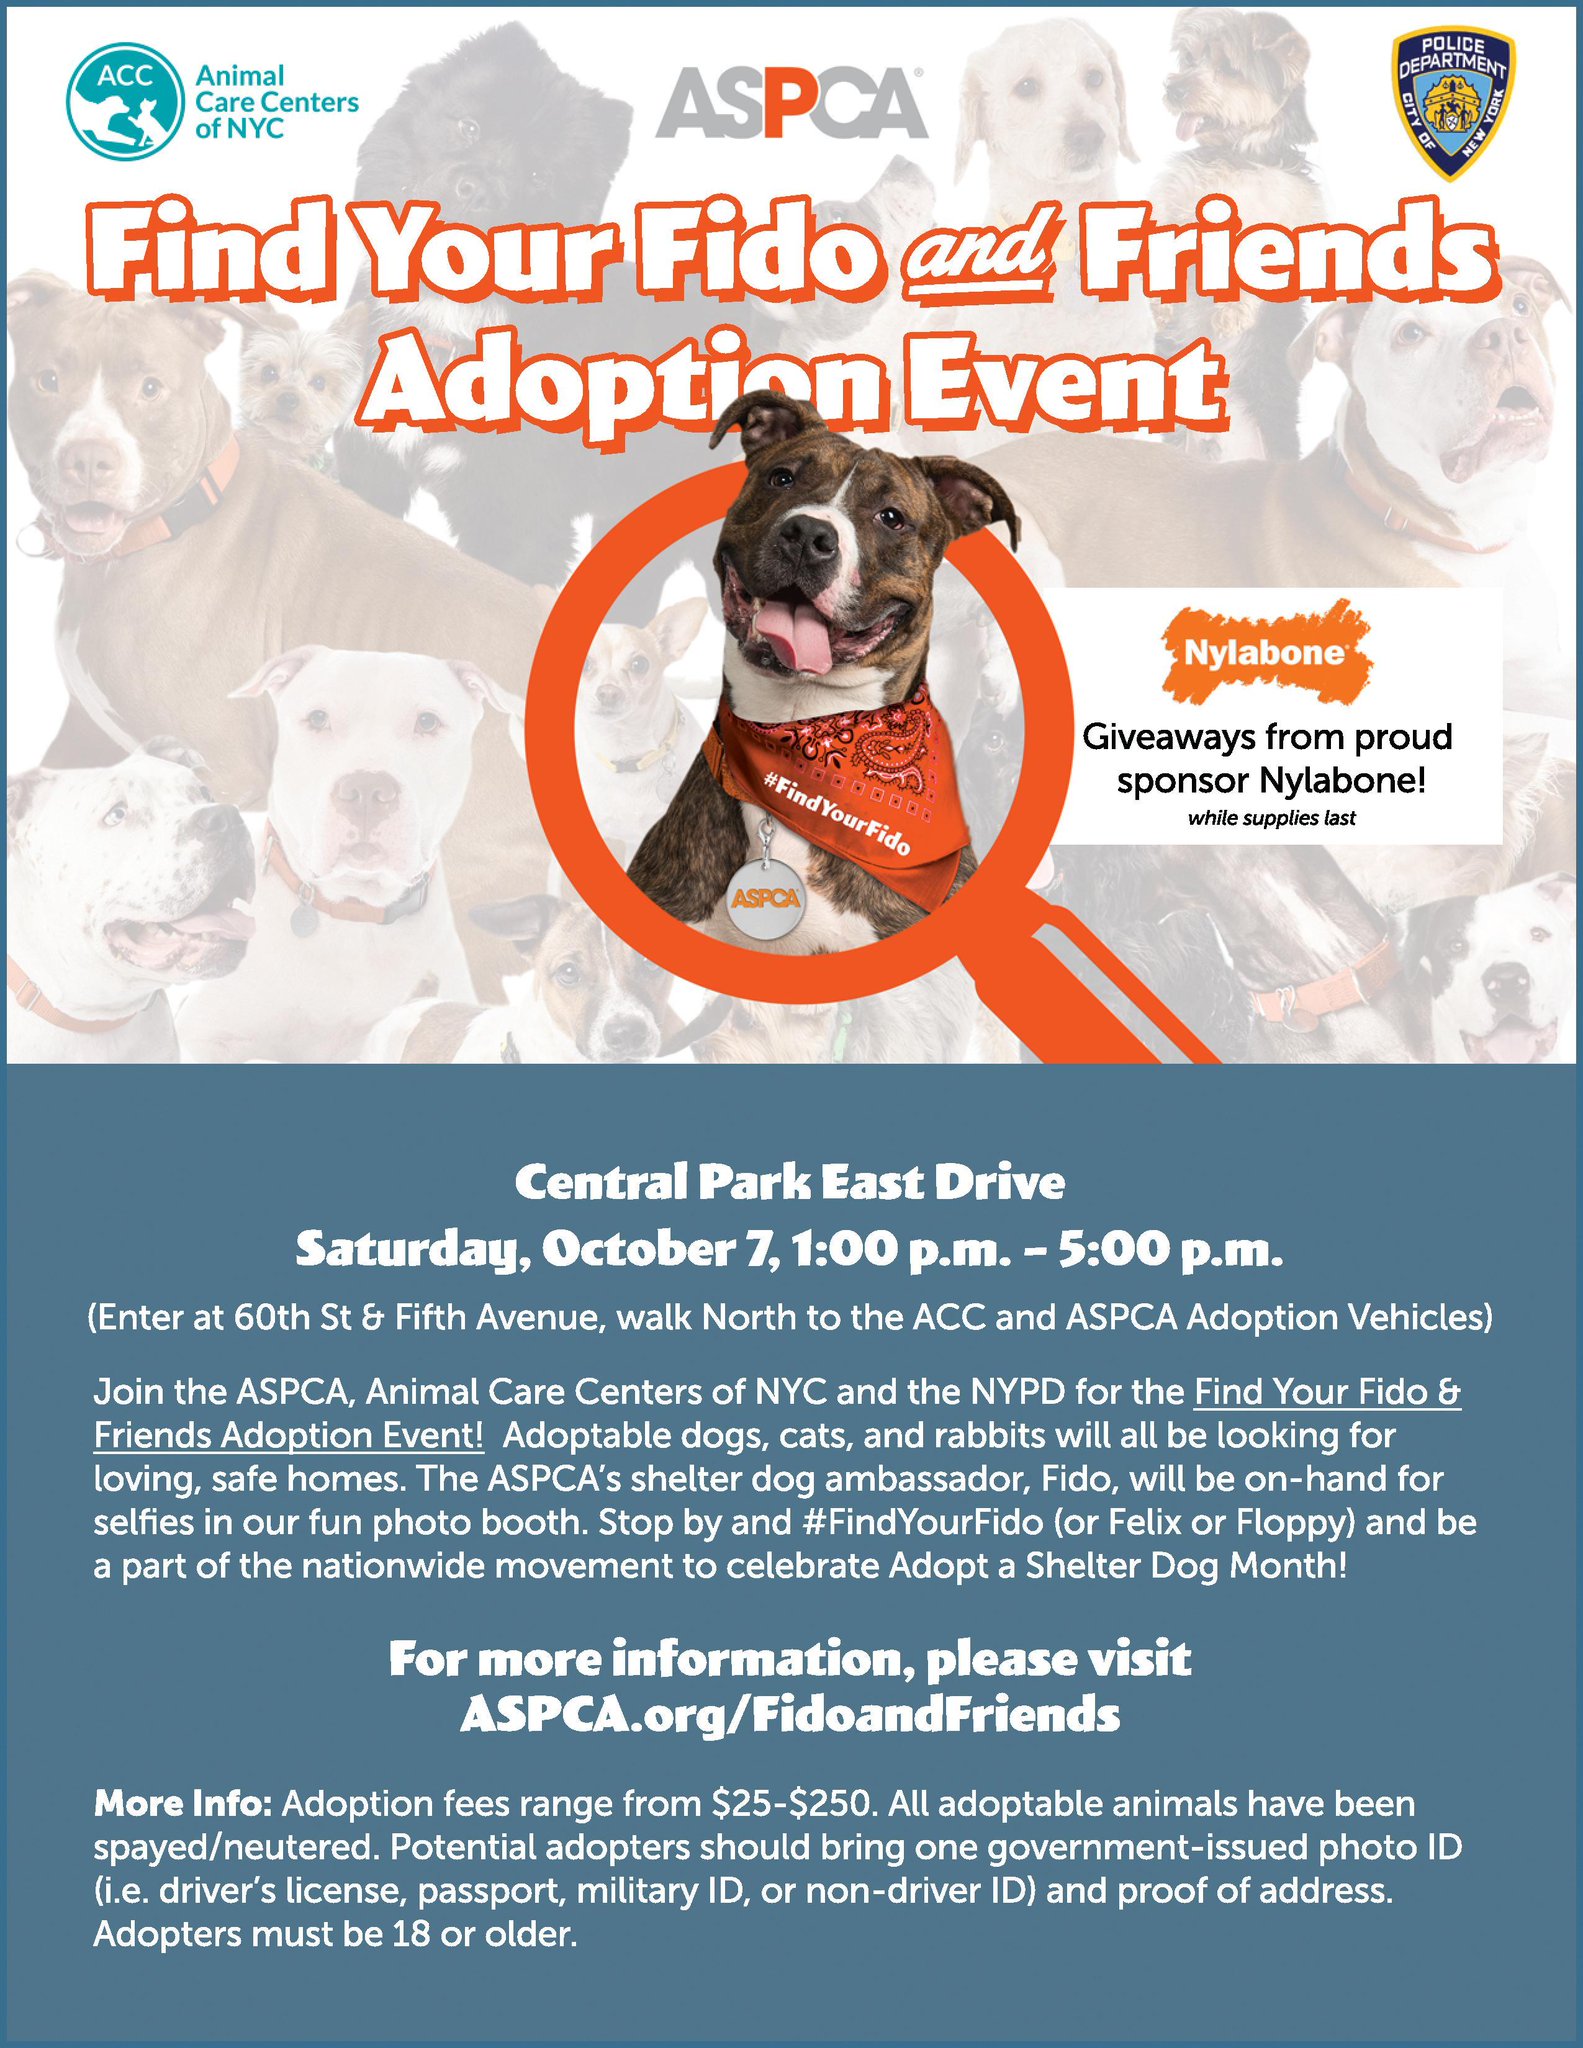 Aspca Nyc Join Us Today 1pm In Centralpark For A Special Findyourfido Adoption Event With Nycacc Nypdpaws Info T Co Scjjekid T Co P9hmfsadqg